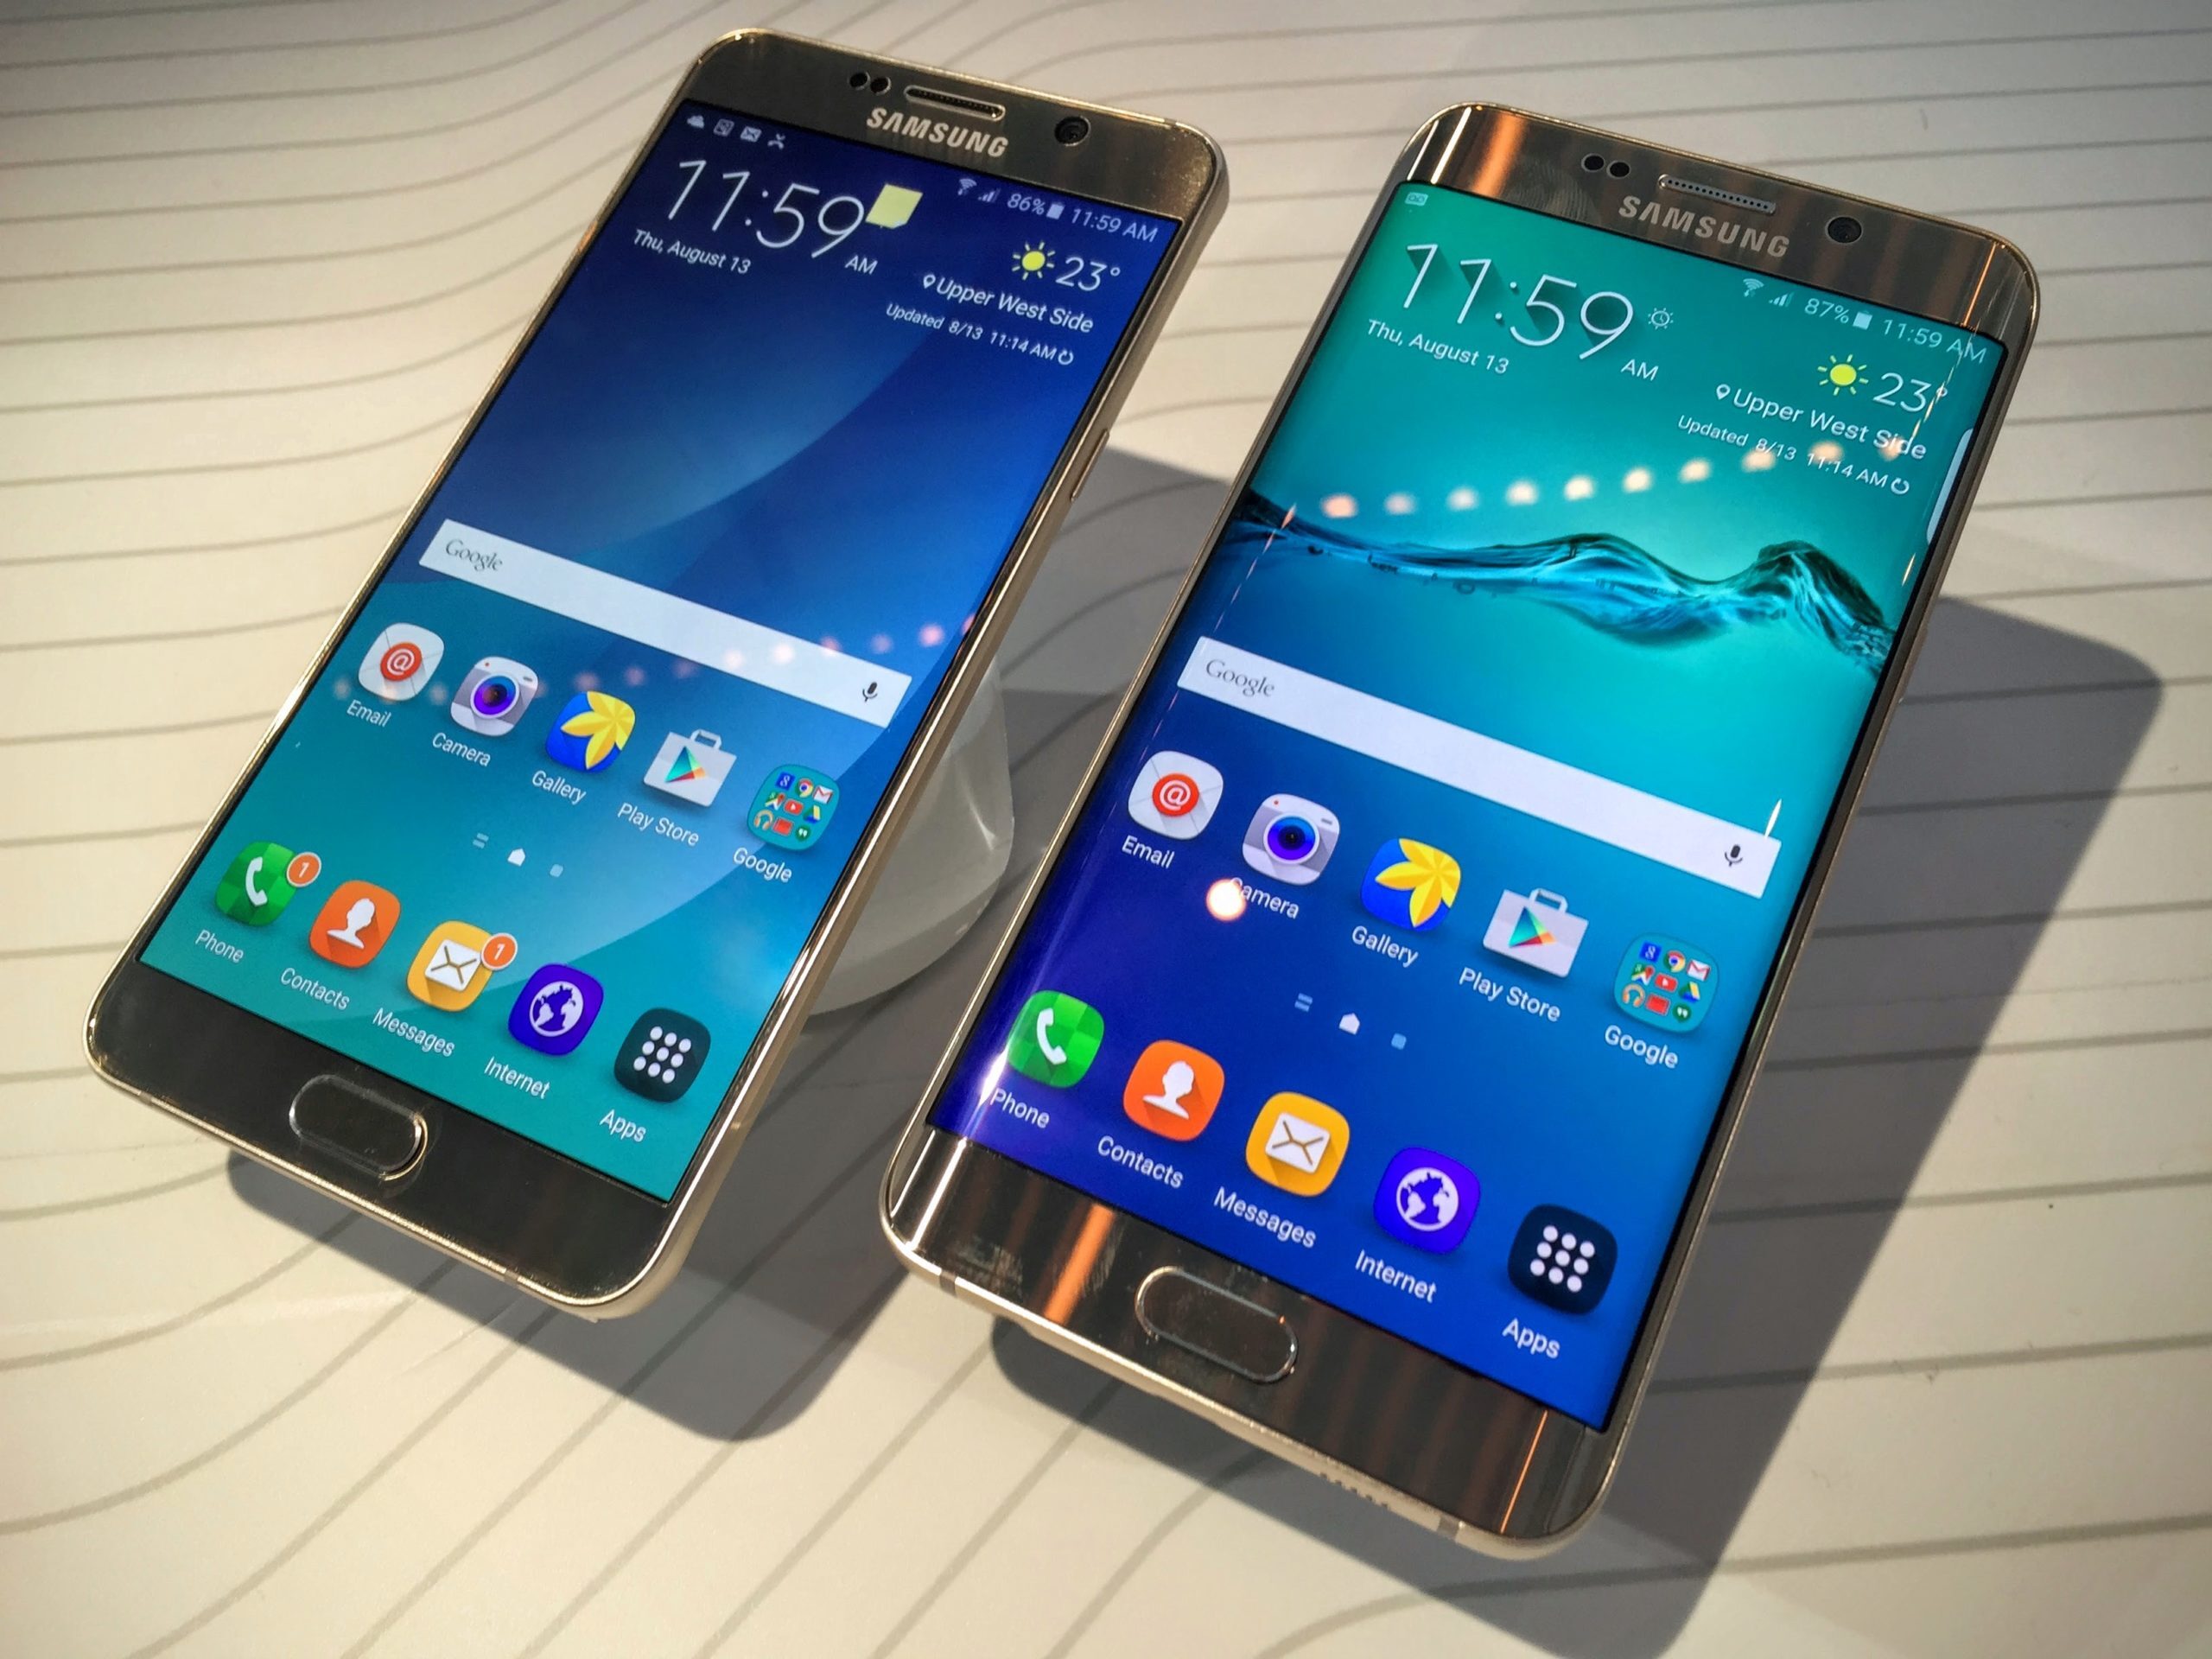 The Note 5 on the left and S6 Edge+ on the right